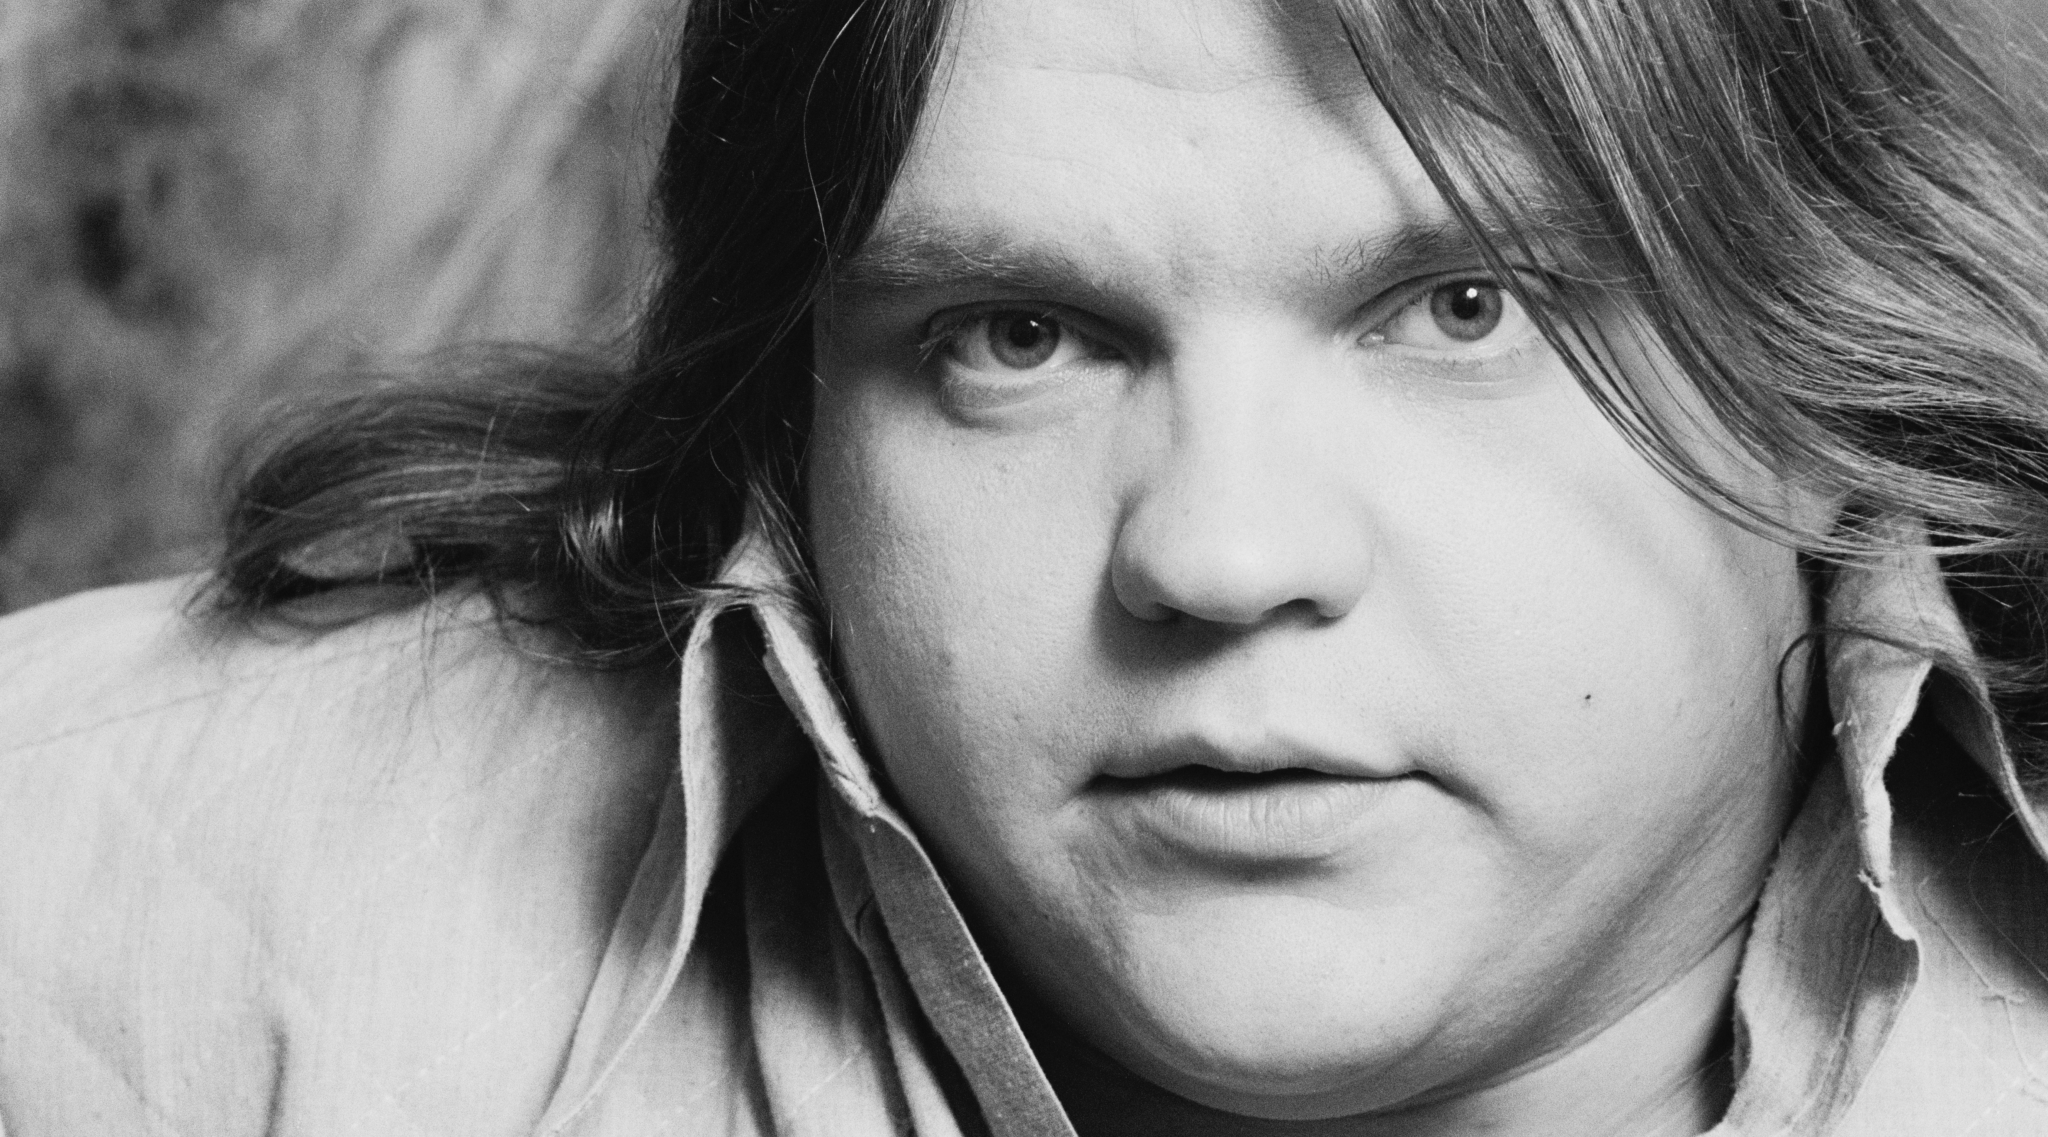 Meat Loaf, Singer and Actor, Dies at 74